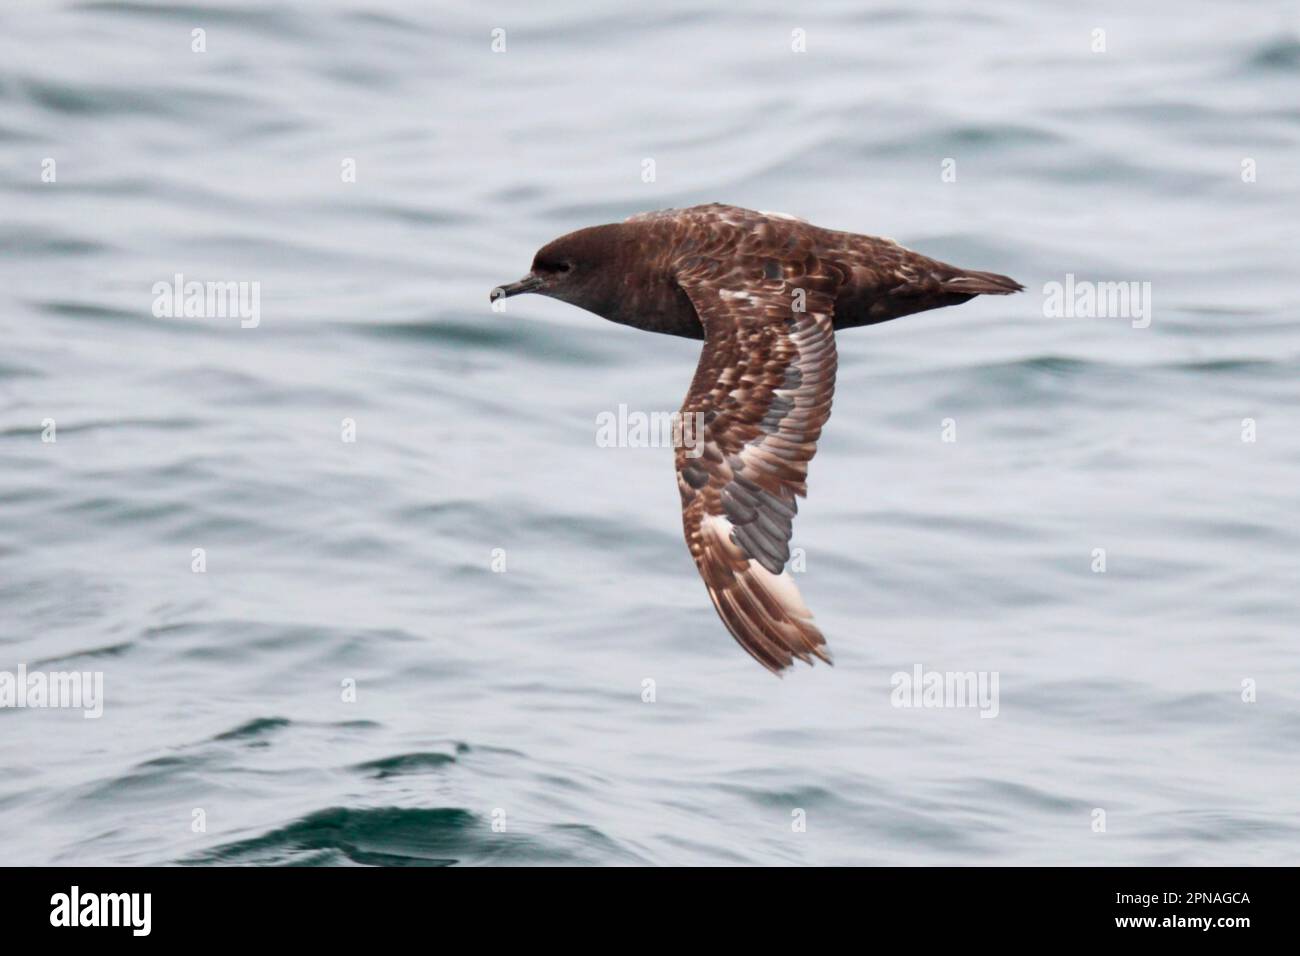 Short-tailed shearwater (Puffinus tenuirostris), tube-nosed, animals, birds, Short-tailed Shearwater adult, moulting wing feathers, in flight over Stock Photo